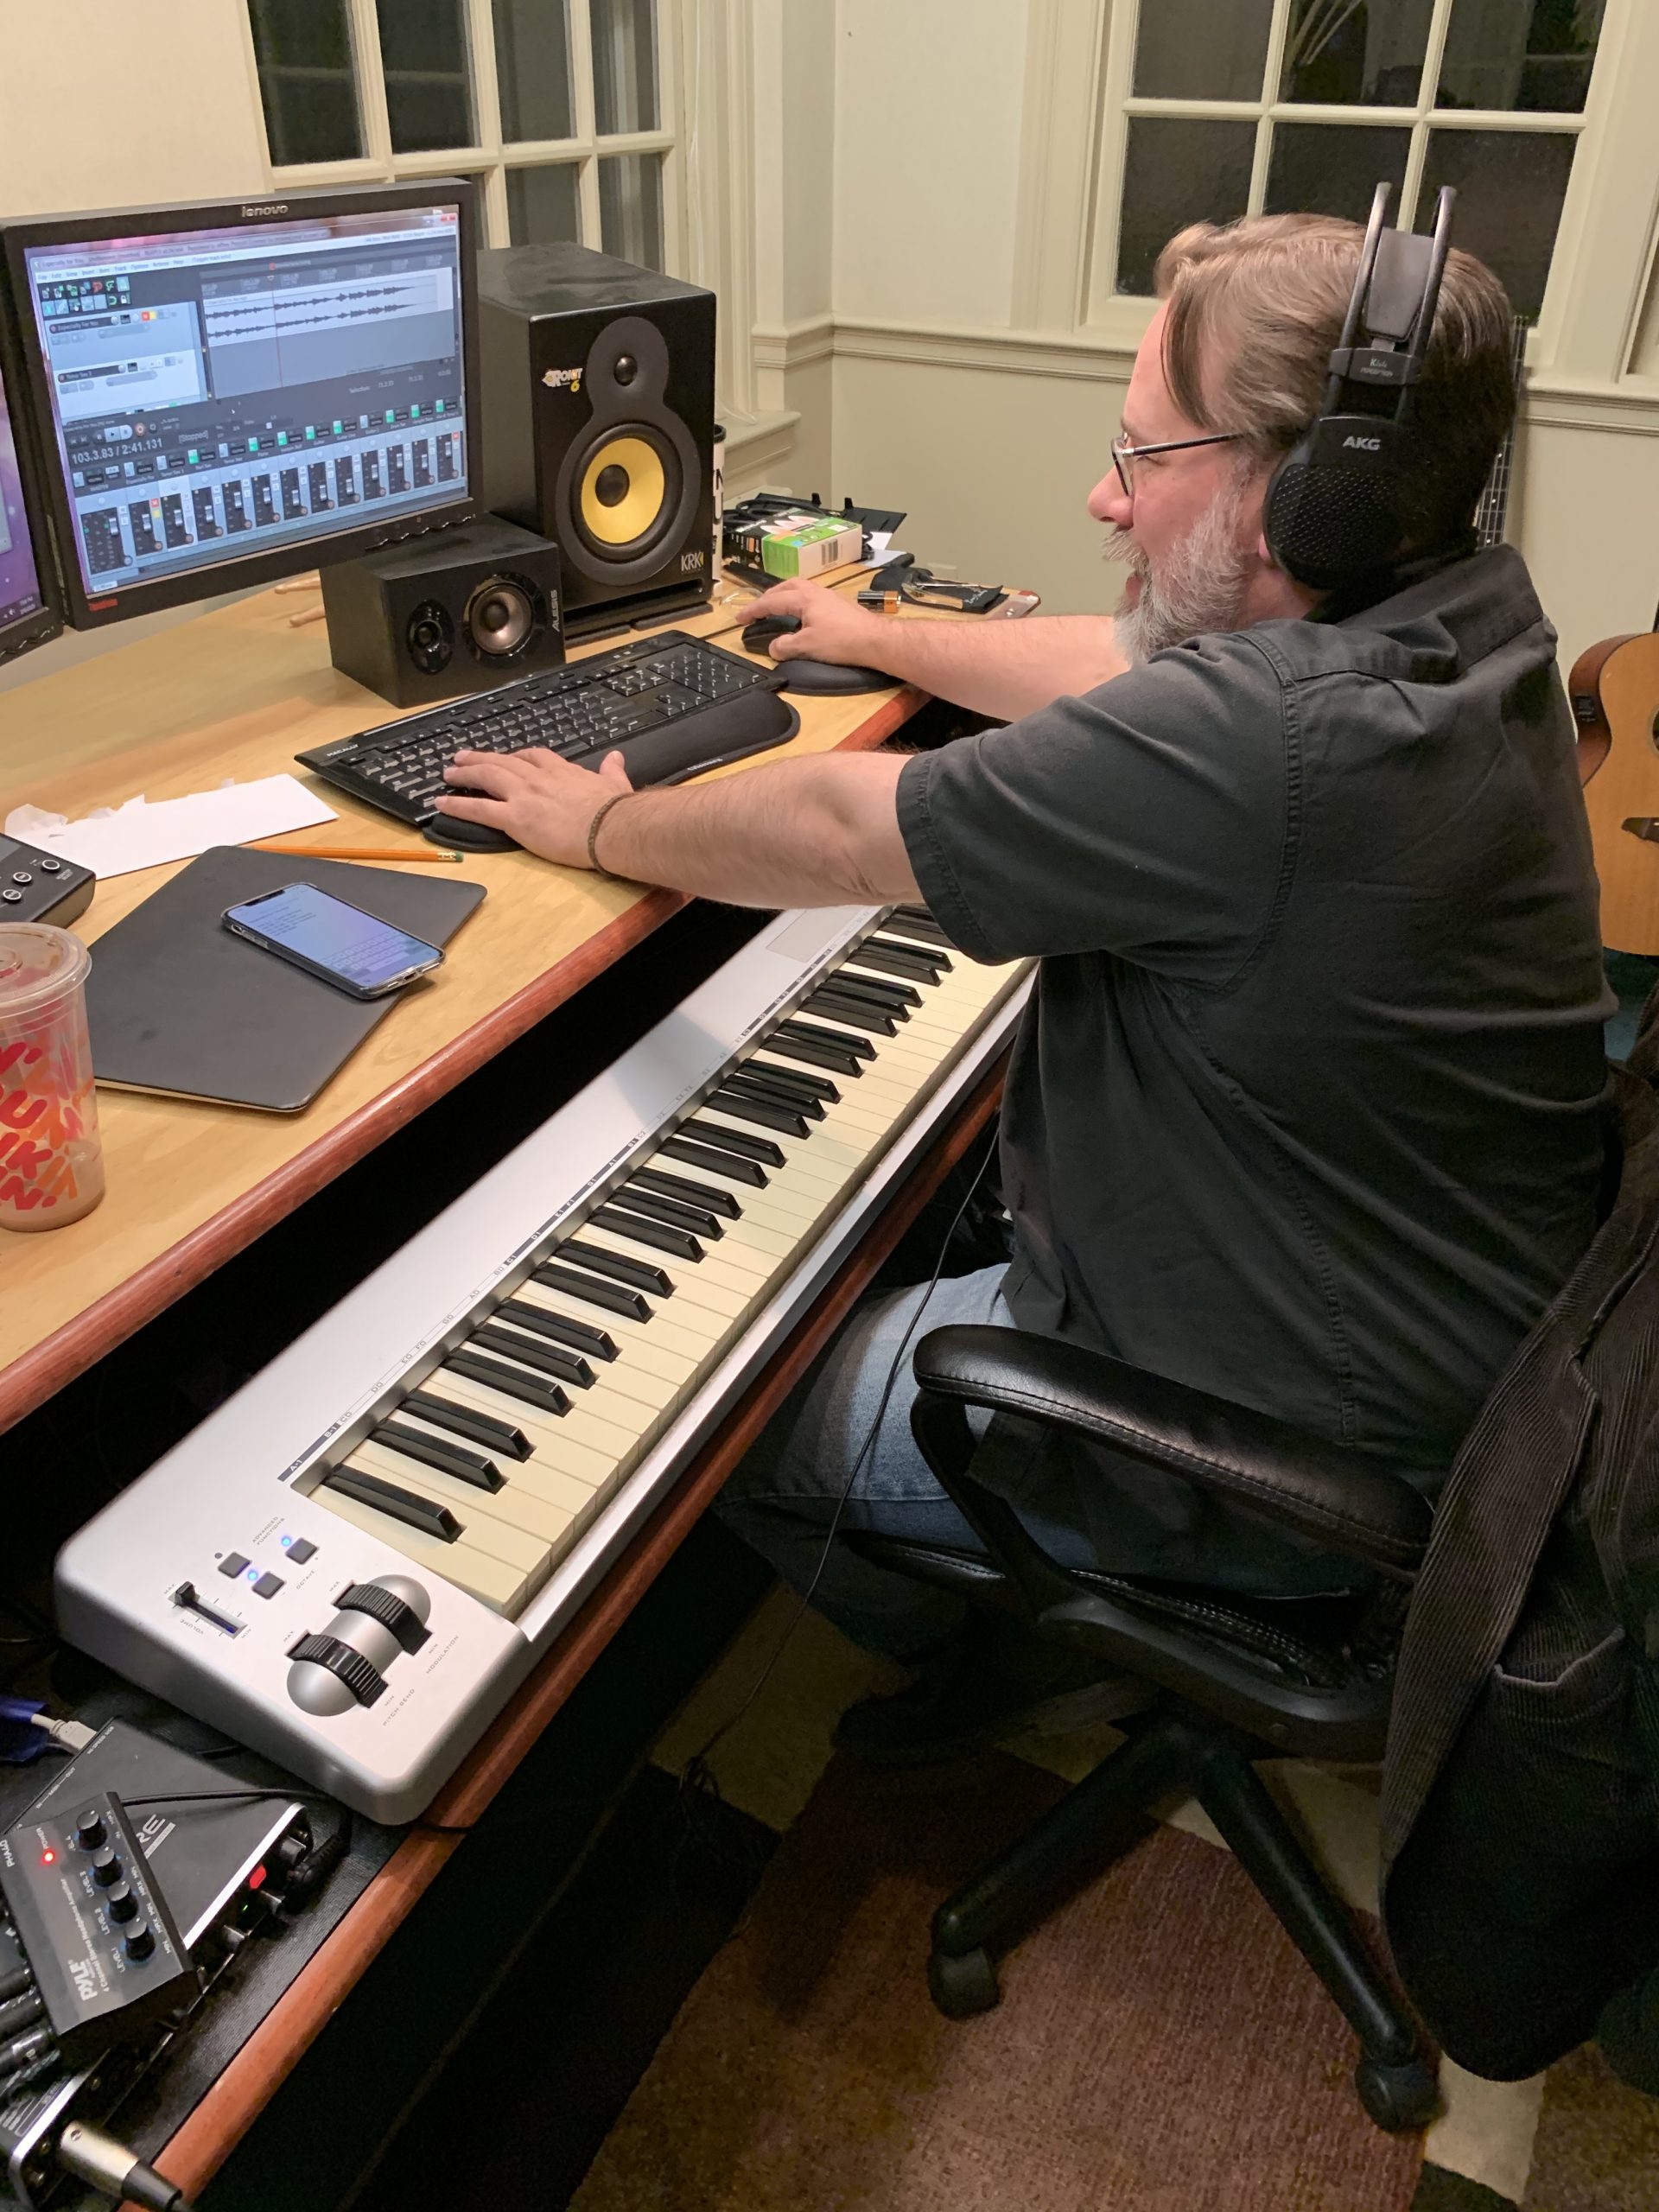 Image from a recording session inside a studio with a man manipulating a computer recording software